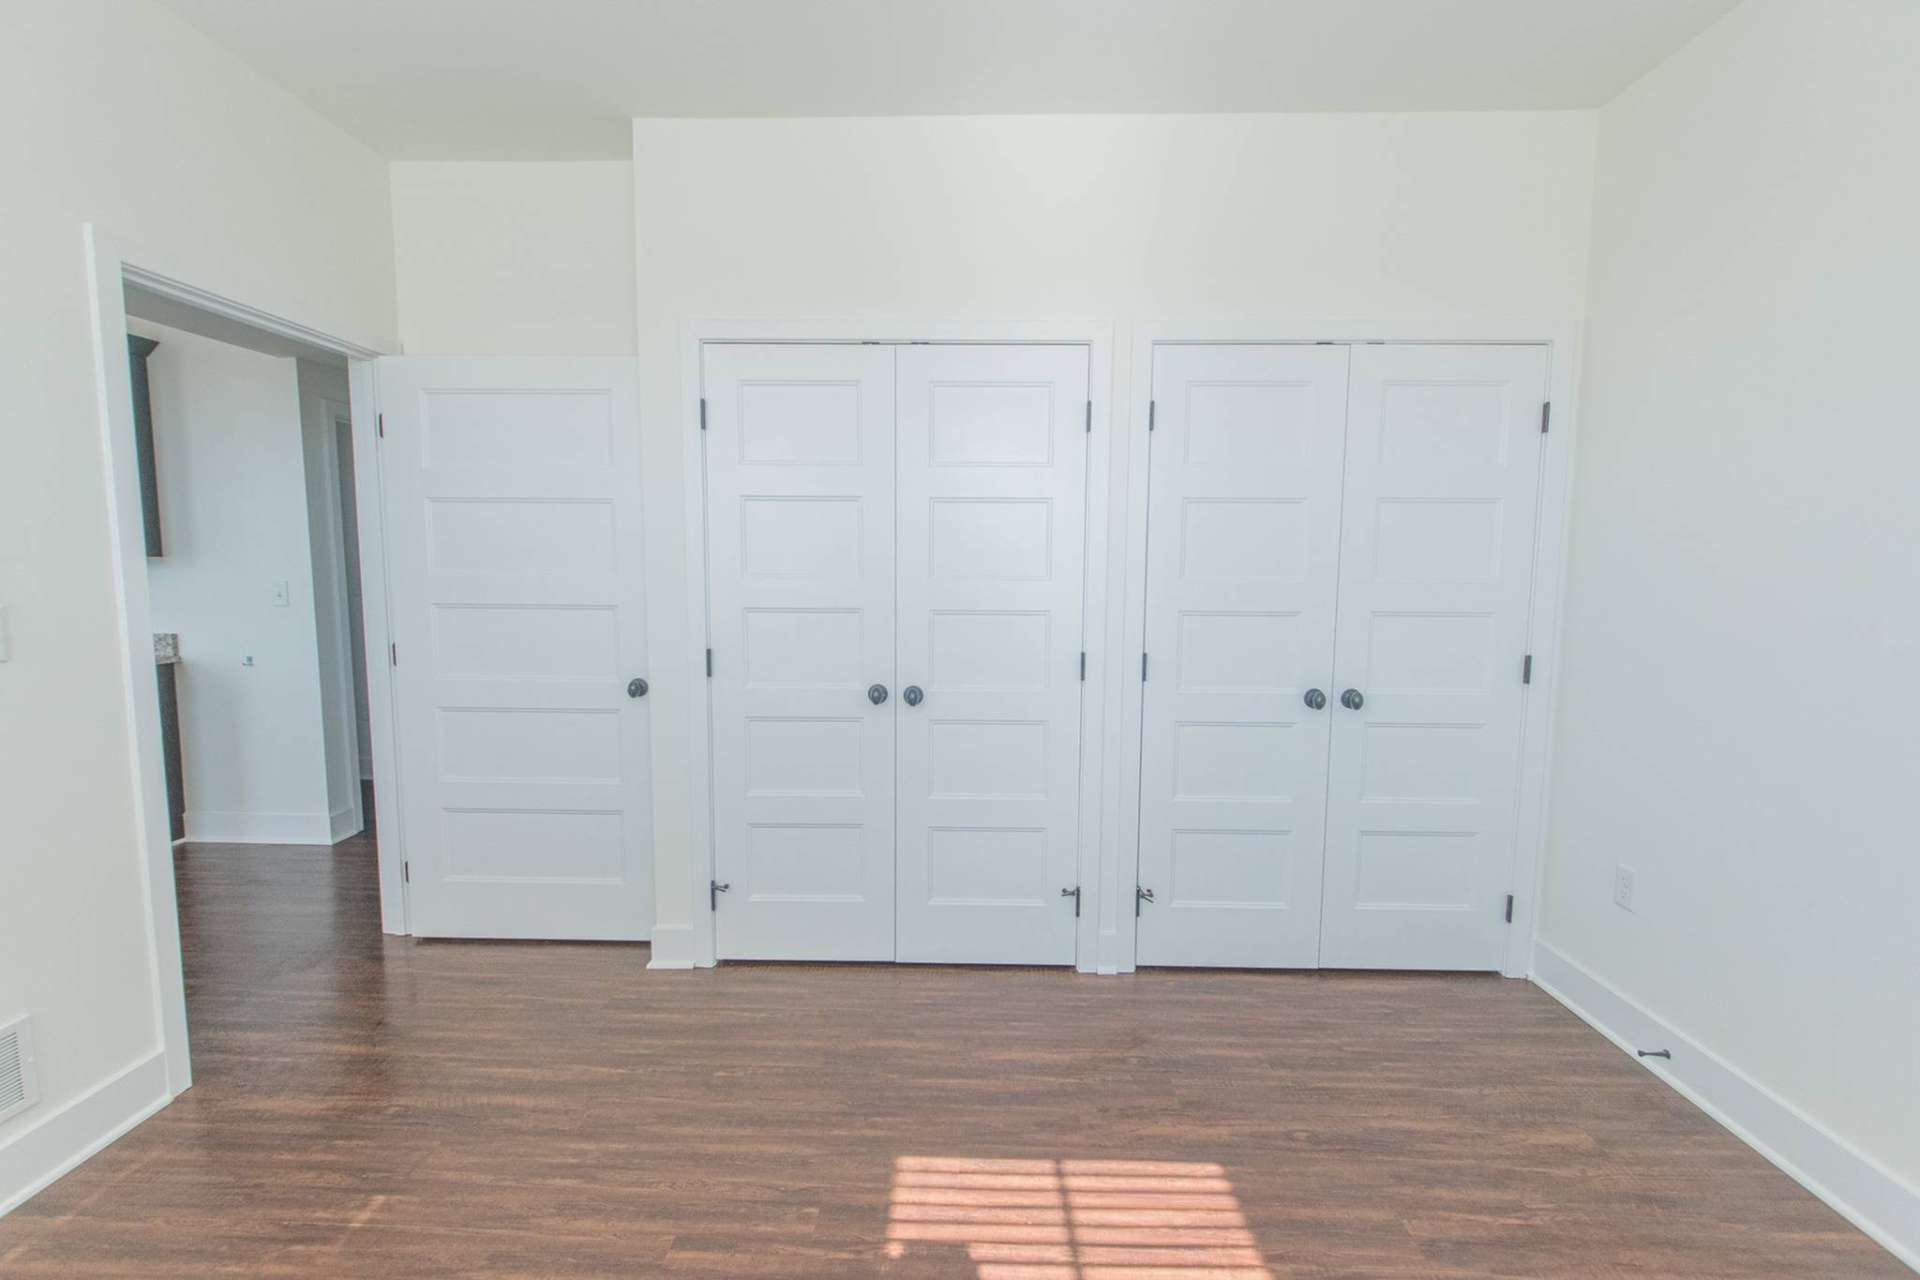 Bedroom with wooden floors and two closets.